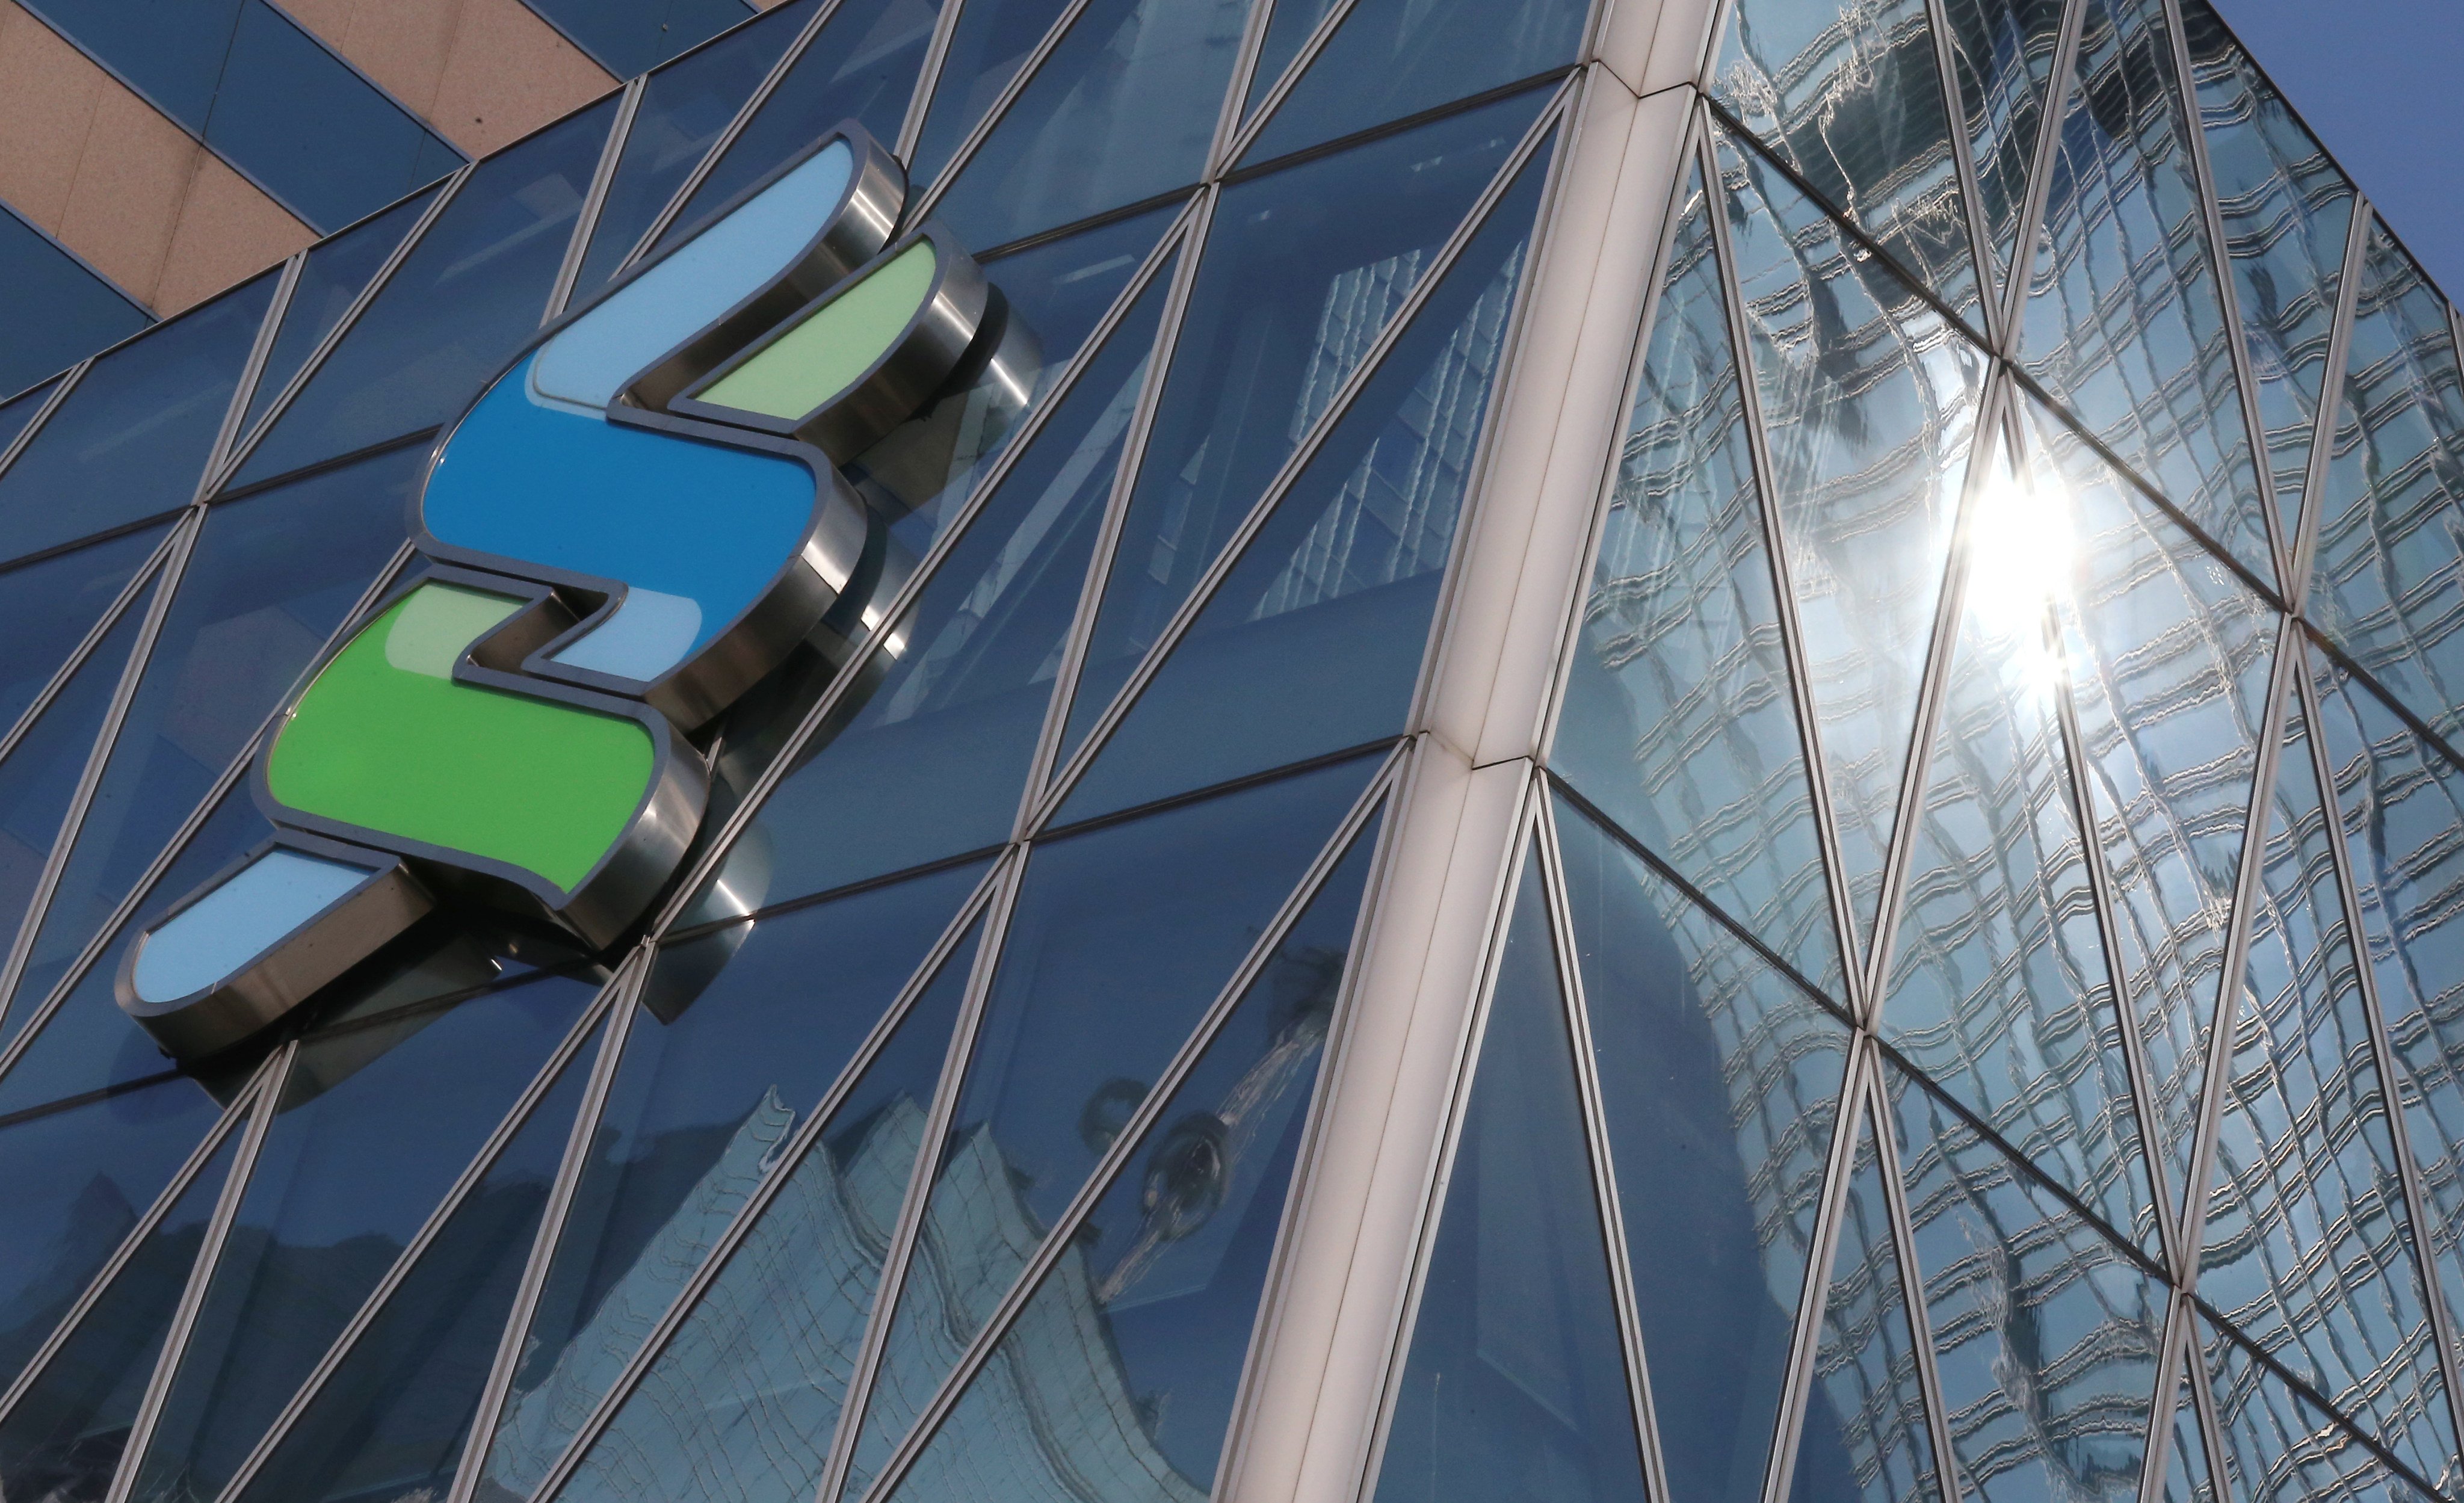 A Standard Chartered logo has been seen at The Forum occupied by Standard Chartered in Central. Photo: K. Y. Cheng